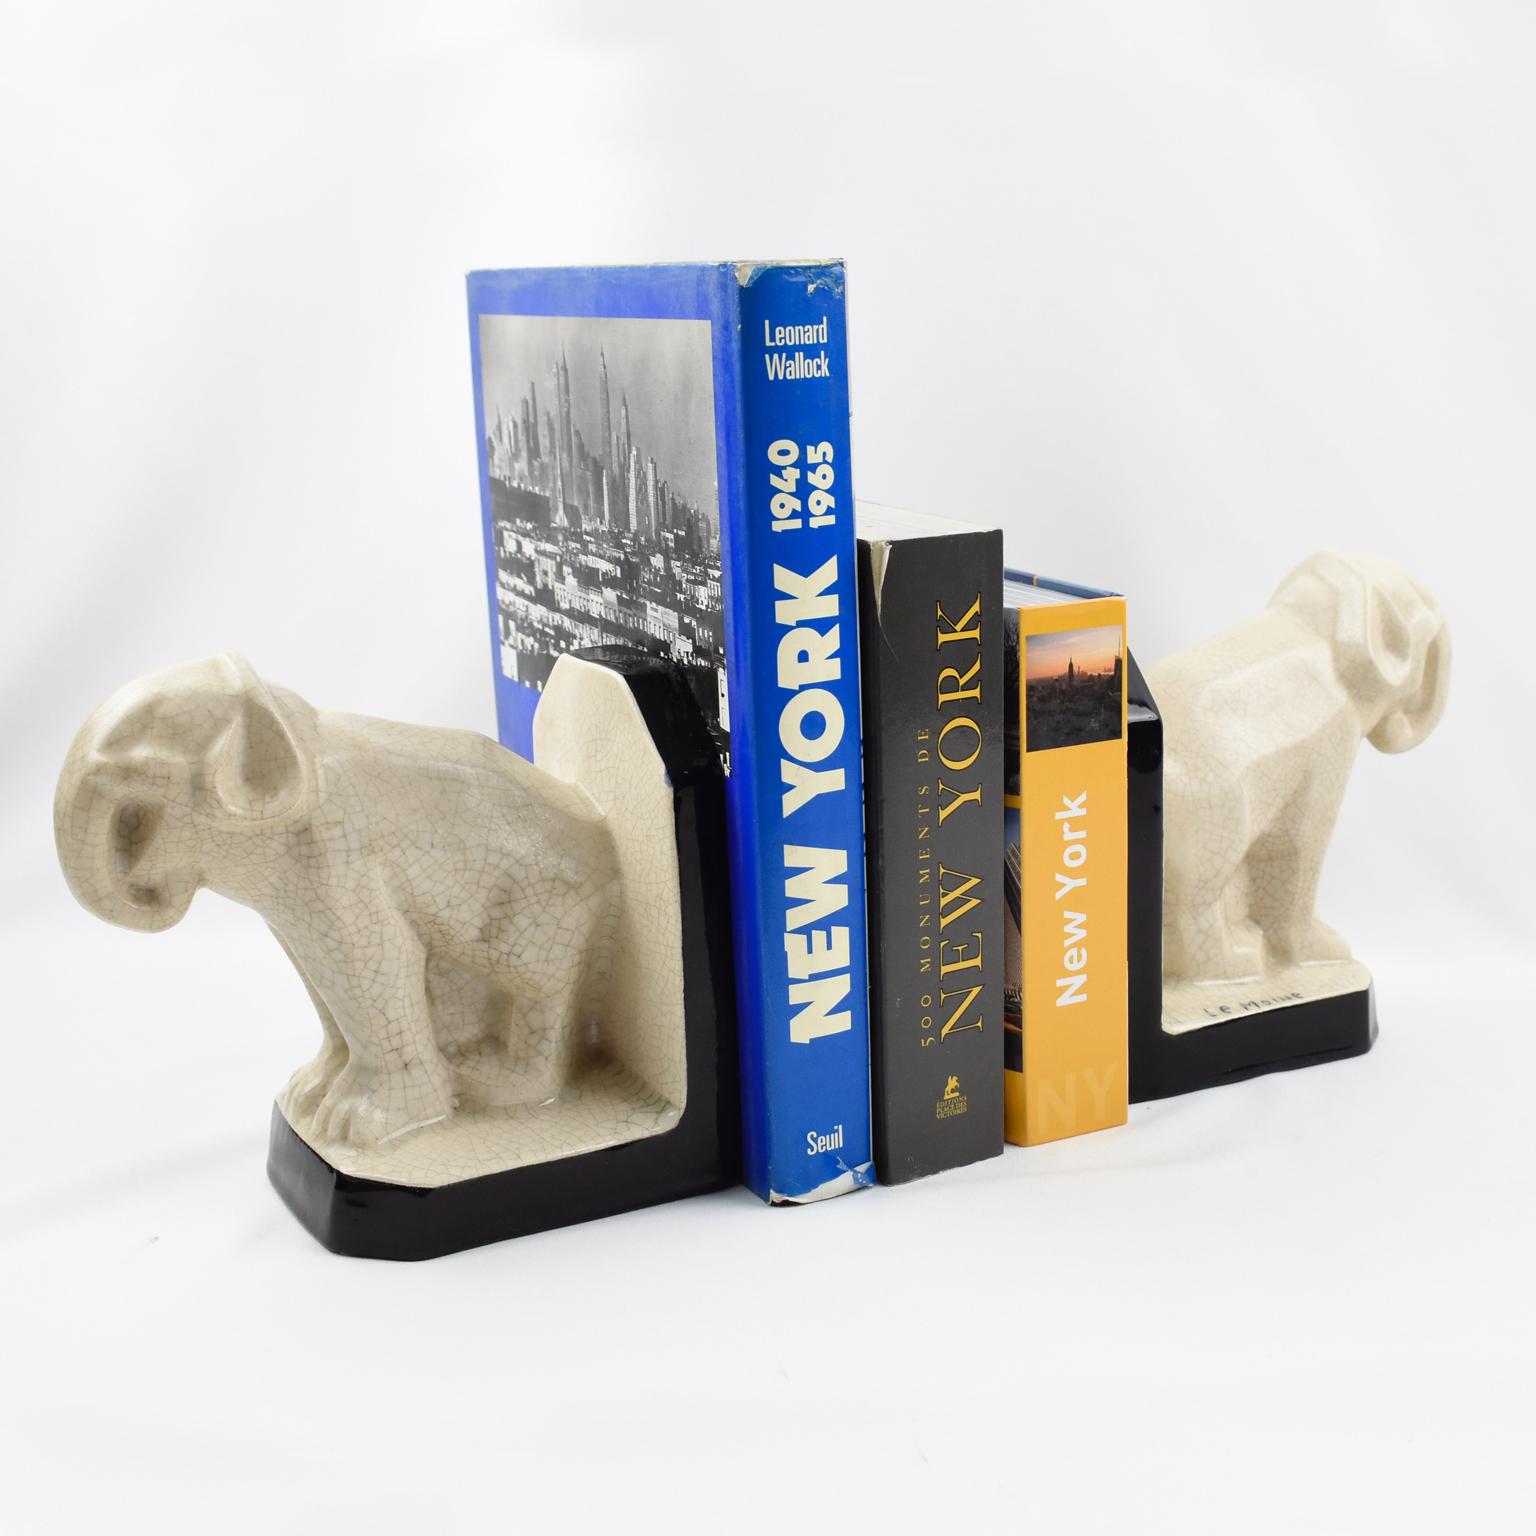 This superb Art Deco pair of crackled ceramic bookends were designed and crafted by Le Moine, France, in the 1930s. The off-white colored crackle glaze ceramic or faience sculpture features a pair of elephants with contrasted black enameled glaze